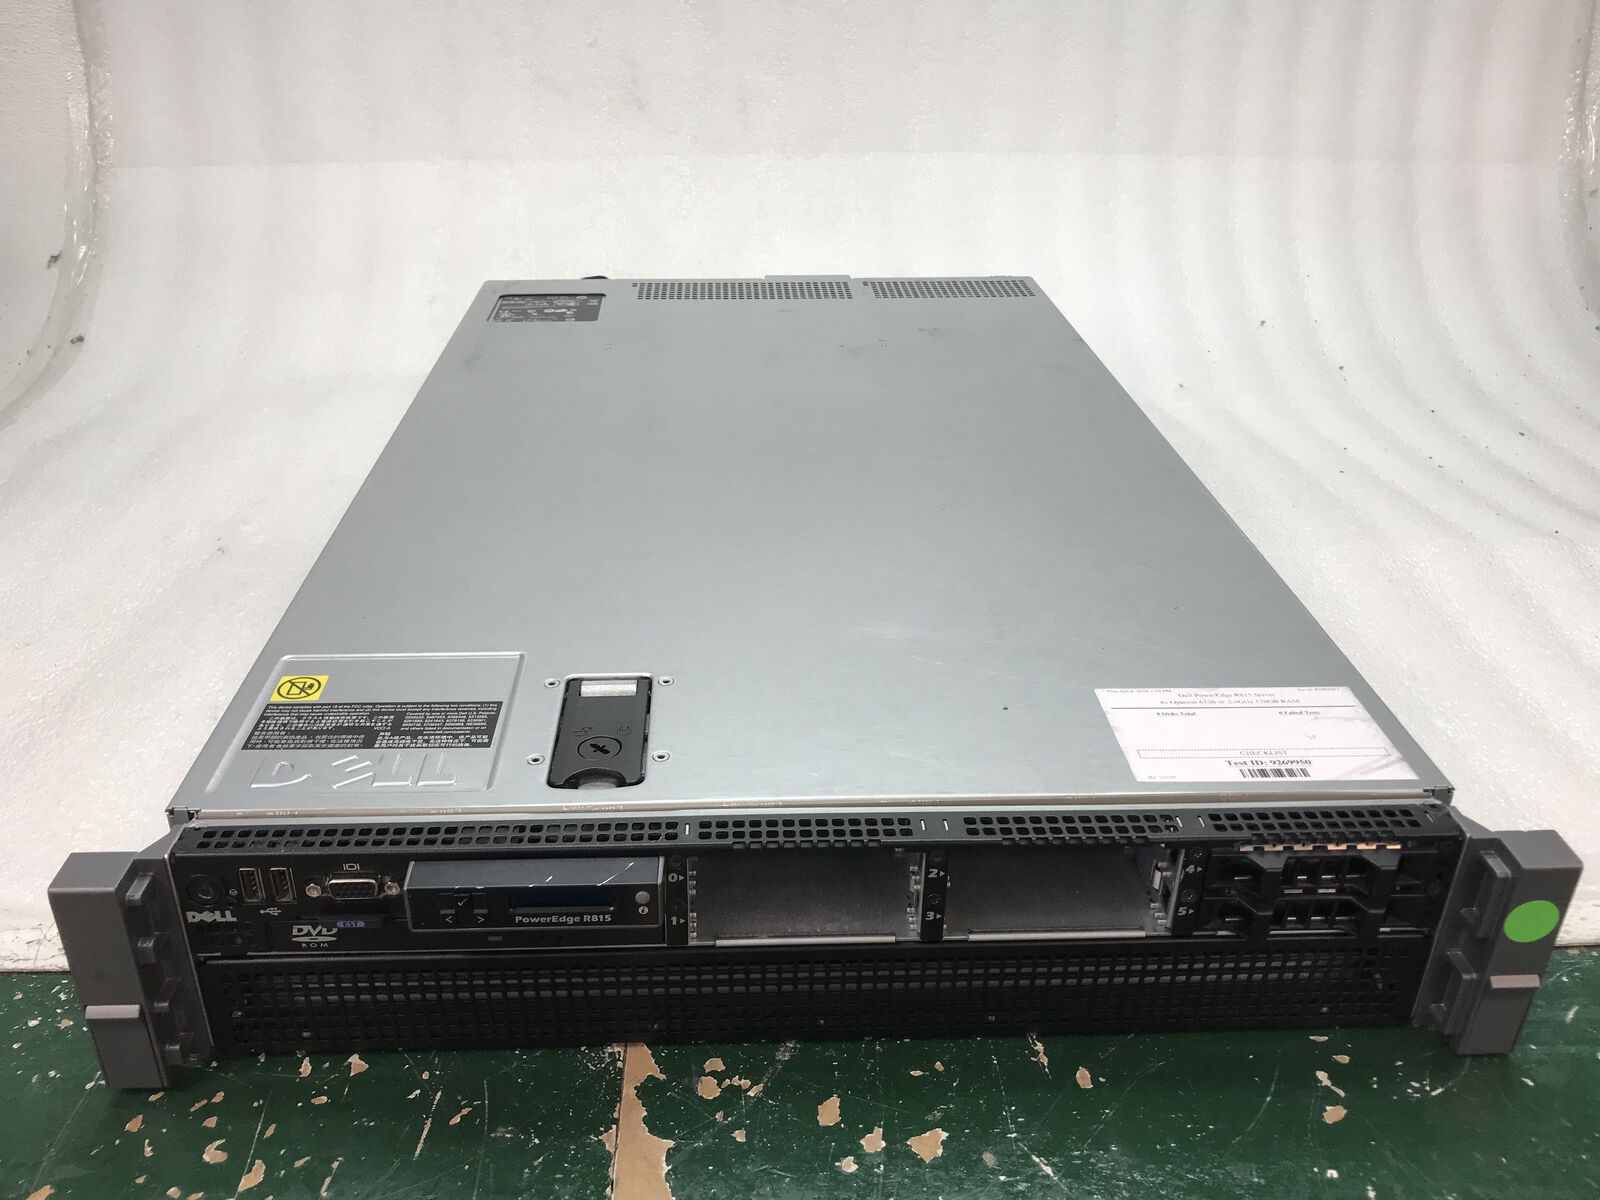 Dell PowerEdge R815 2U Server 4x Opteron 6136 2.4Ghz 32 Cores 128GB RAM NO HDDs